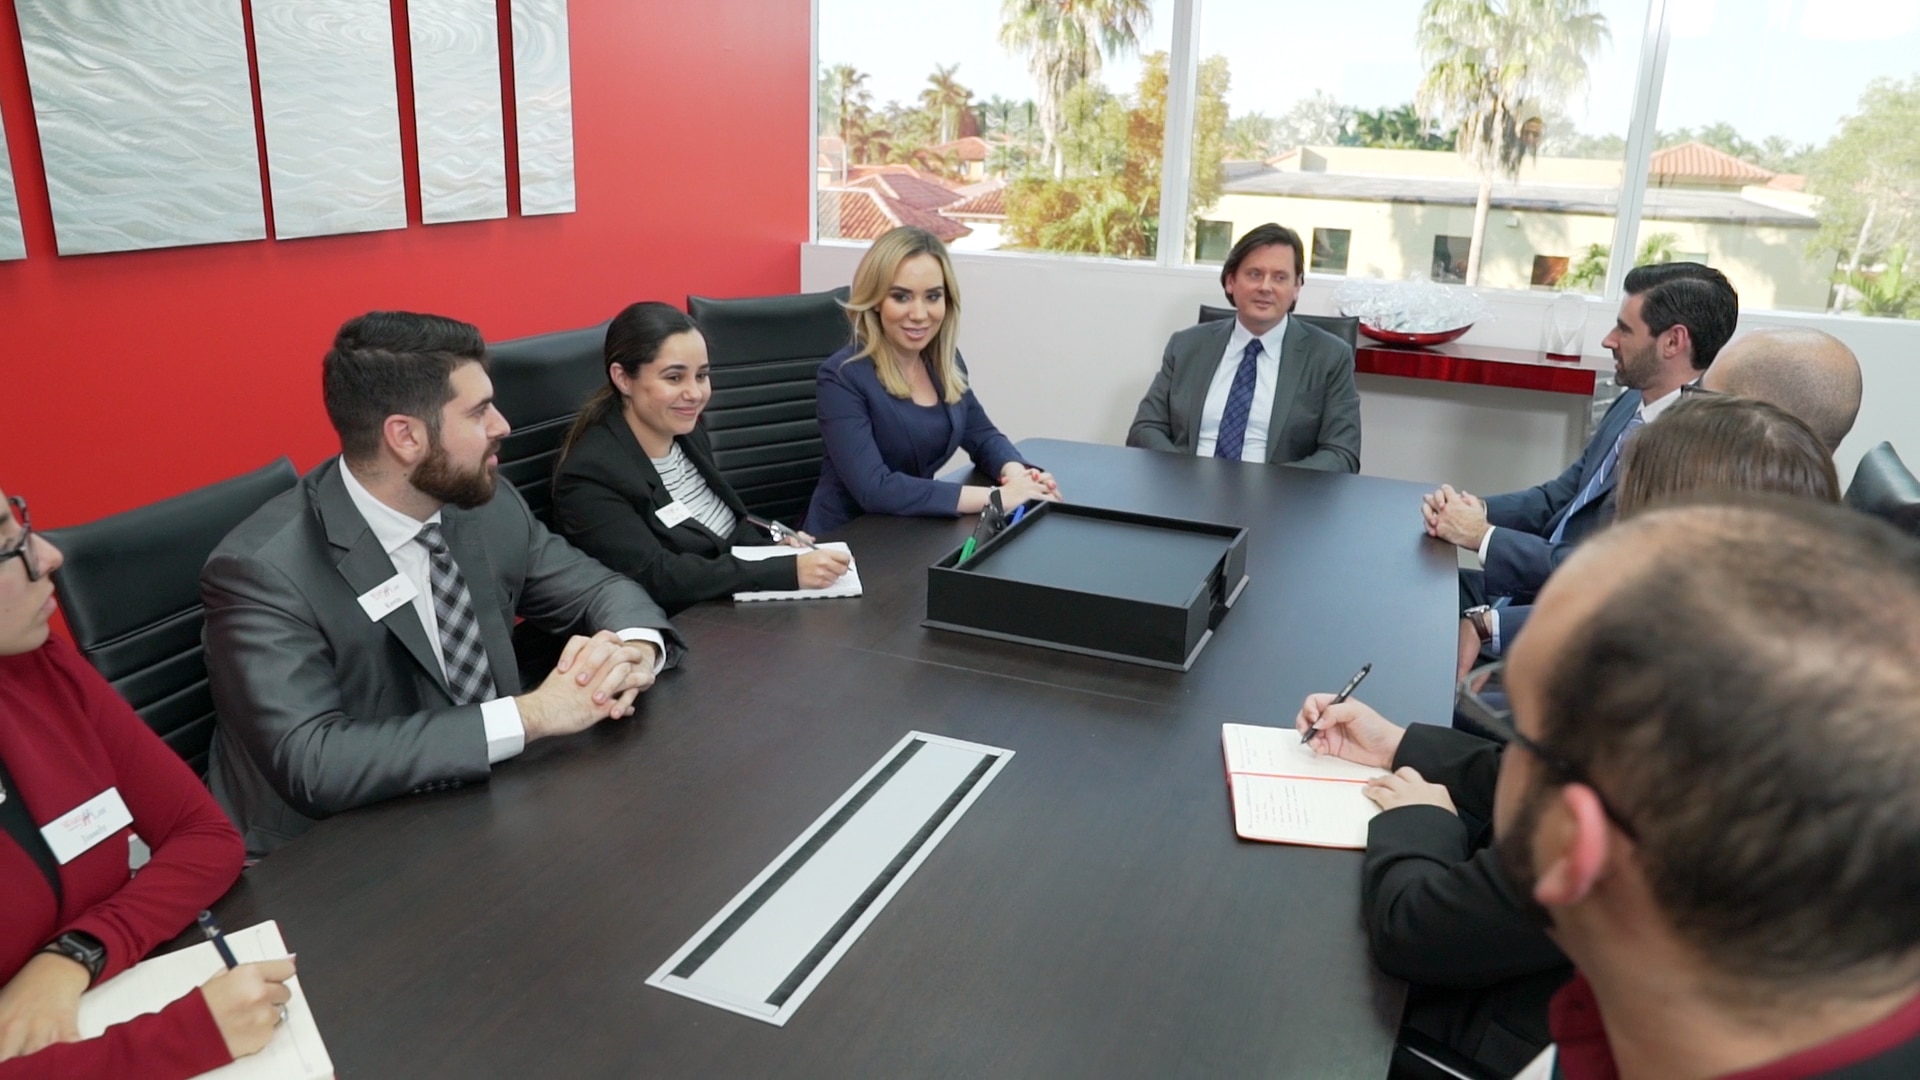 Miami Lakes personal injury lawyers meet at a conference table